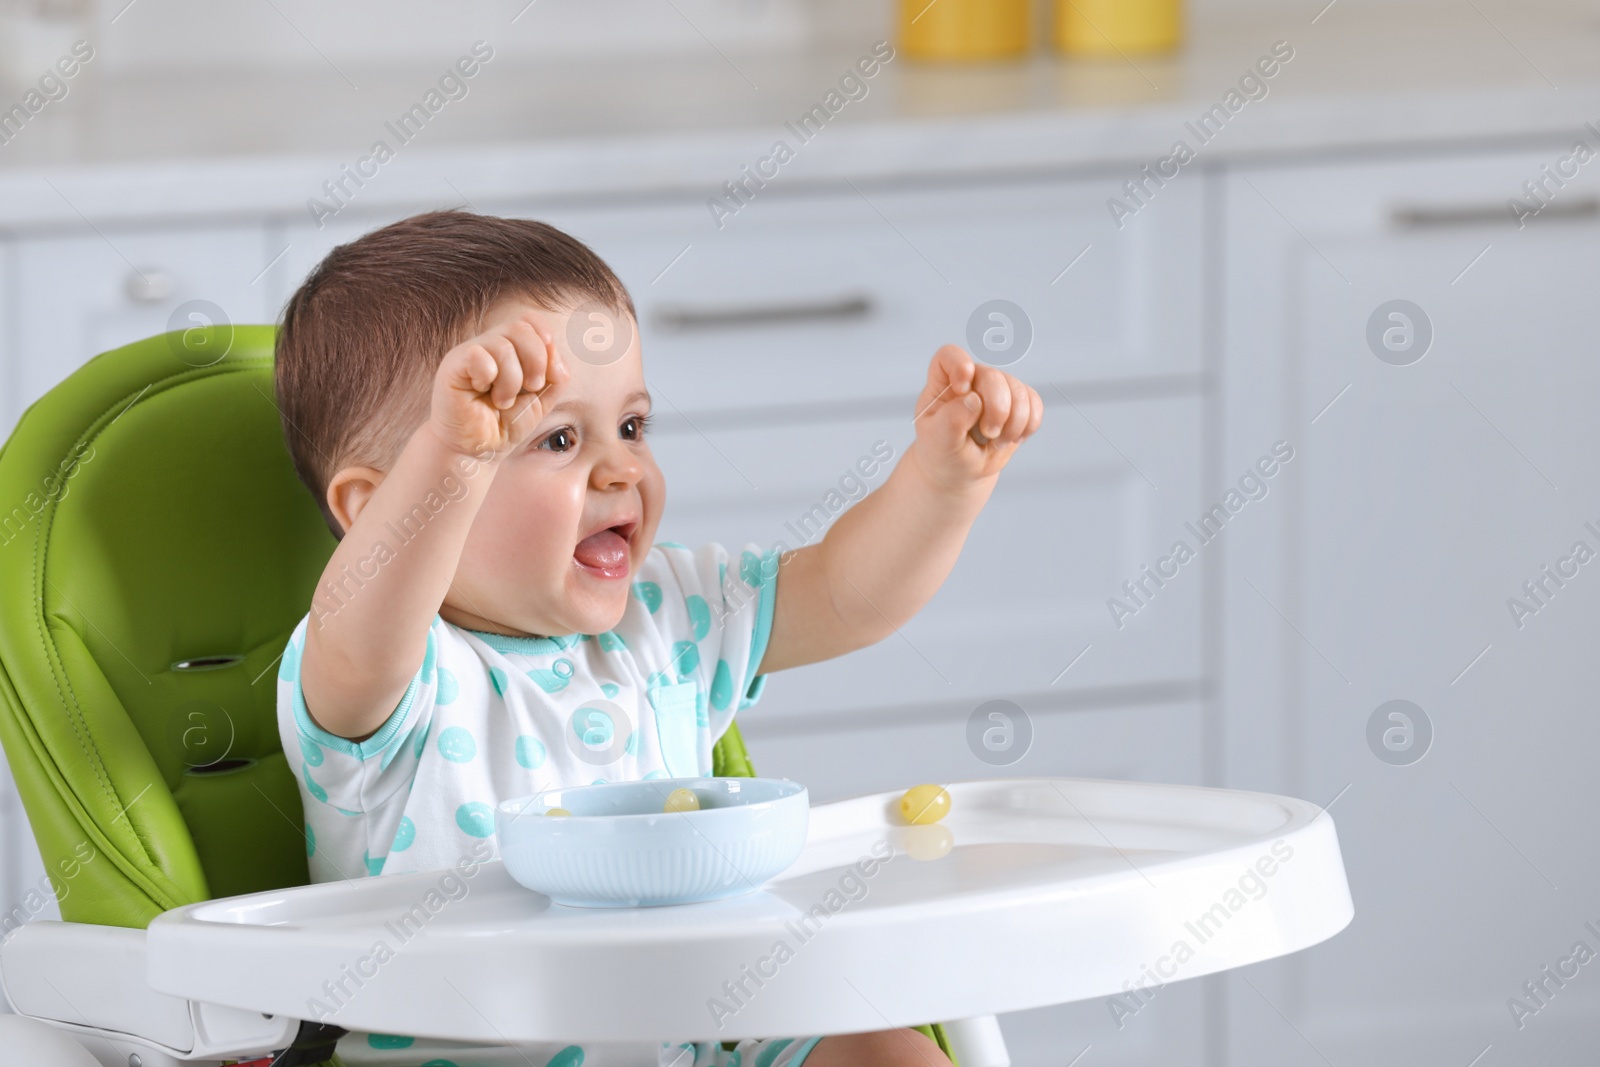 Photo of Cute little baby eating healthy food in high chair at home, space for text